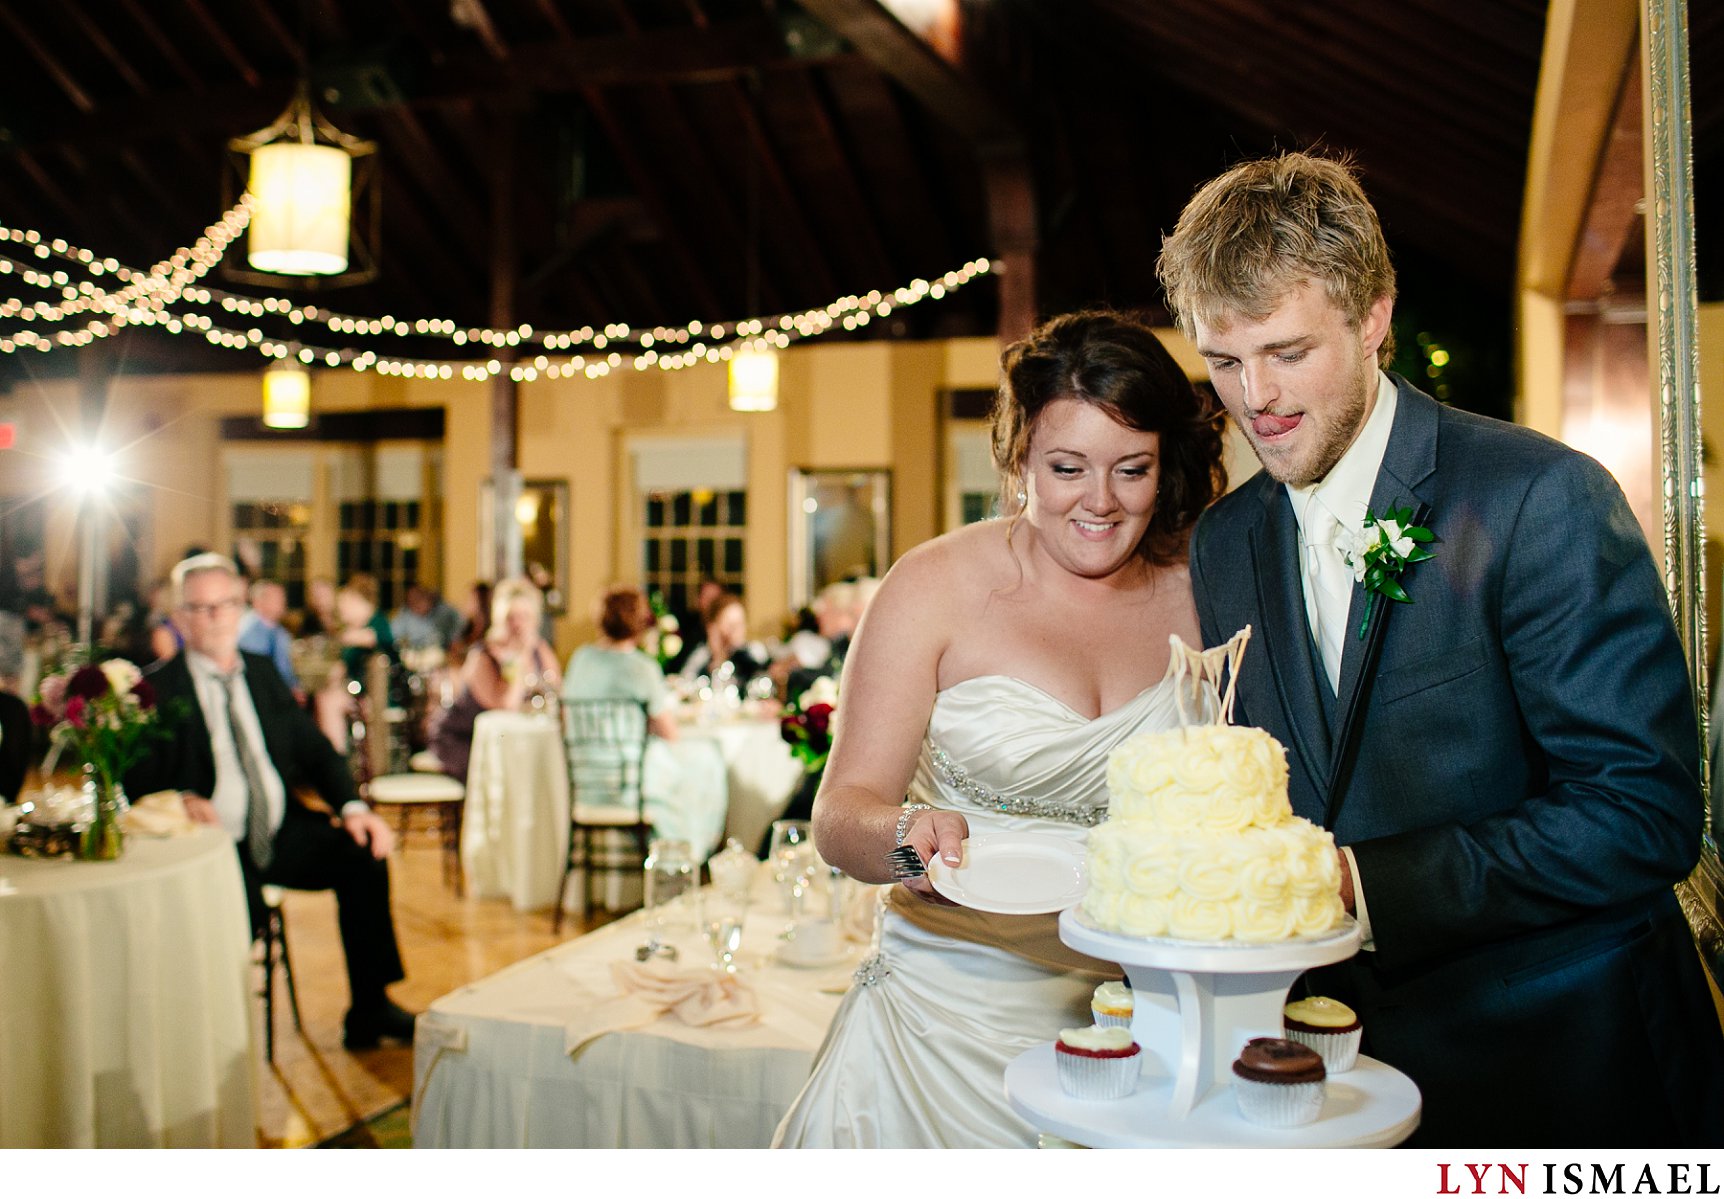 Bride and groom cuts their cake.